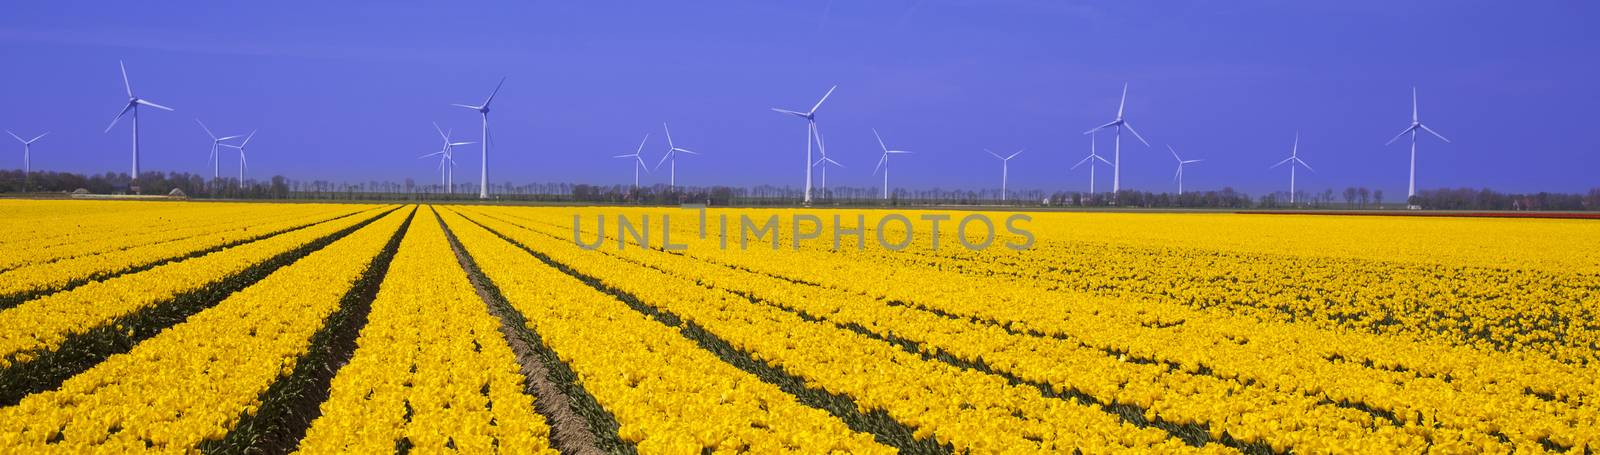 Windmill and colorful tulips in spring of flowers by JanPietruszka